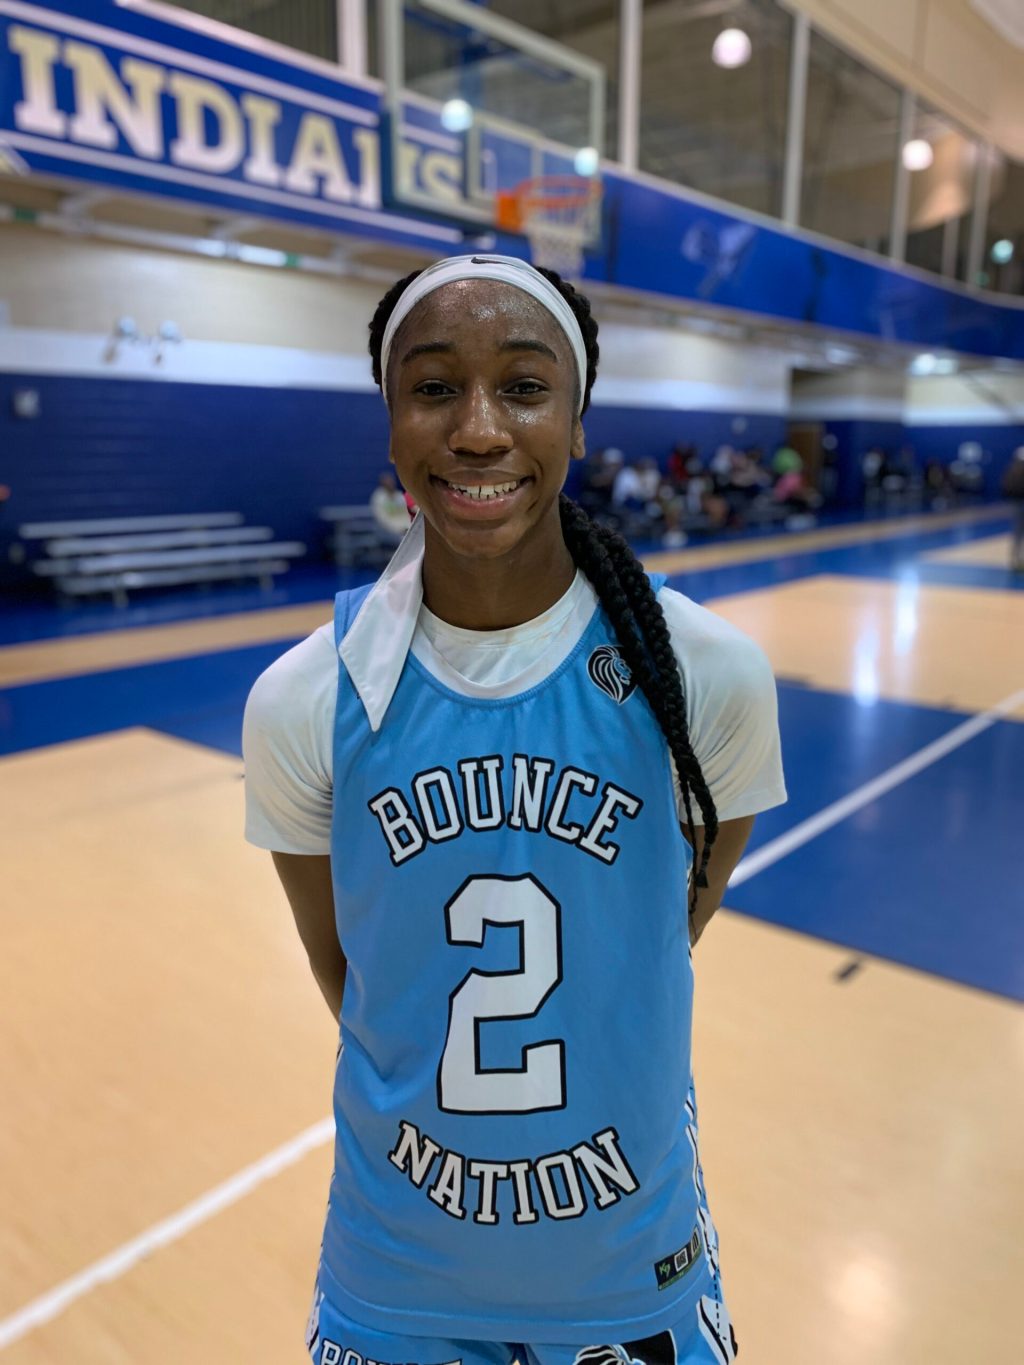 Player Rankings Update: 2023 Stock Risers Pt. 1